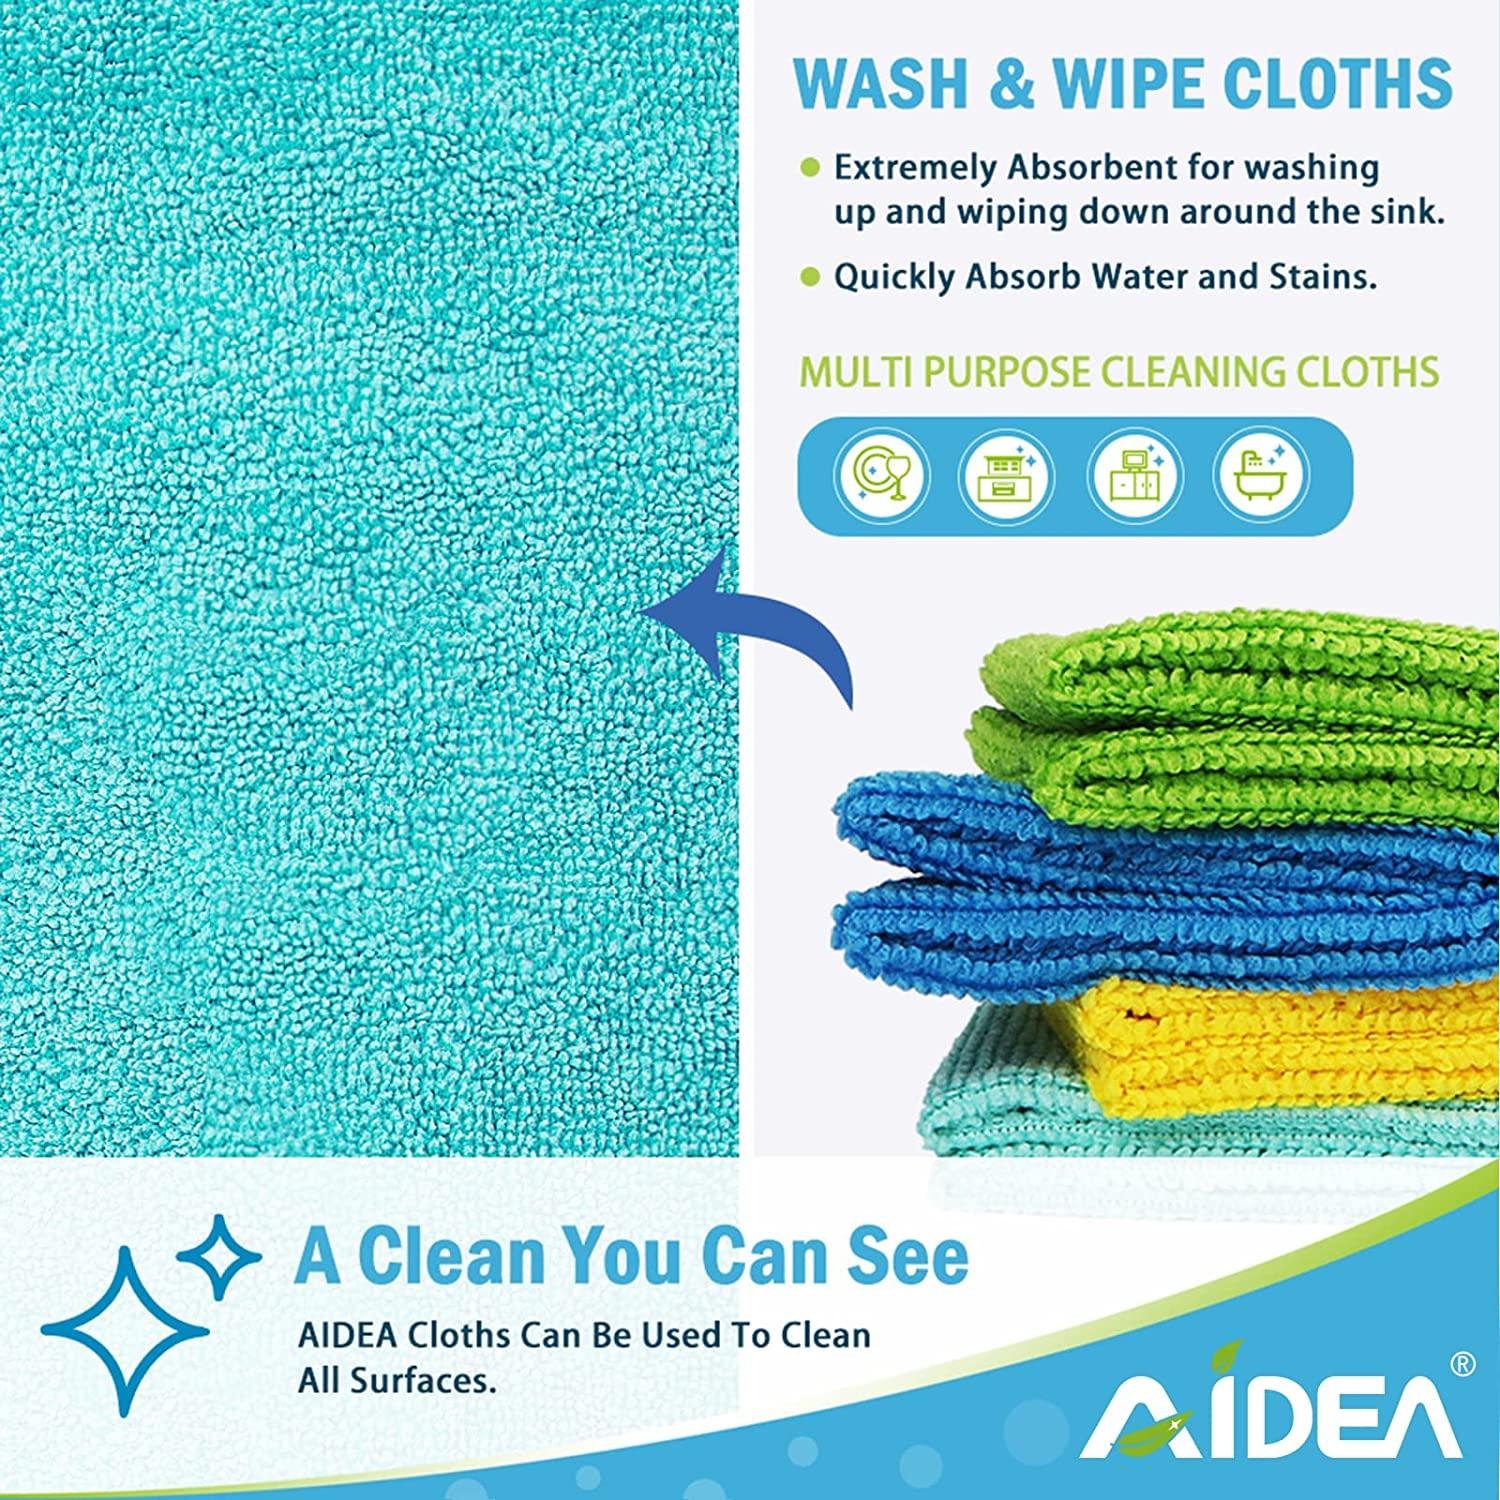 AIDEA Microfiber Cleaning Cloths-8PK, All-Purpose Softer Highly Absorbent,  Lint Free - Streak Free Wash Cloth for House, Kitchen, Car, Window,  Gifts(12in.x 12in.) Blue-orange